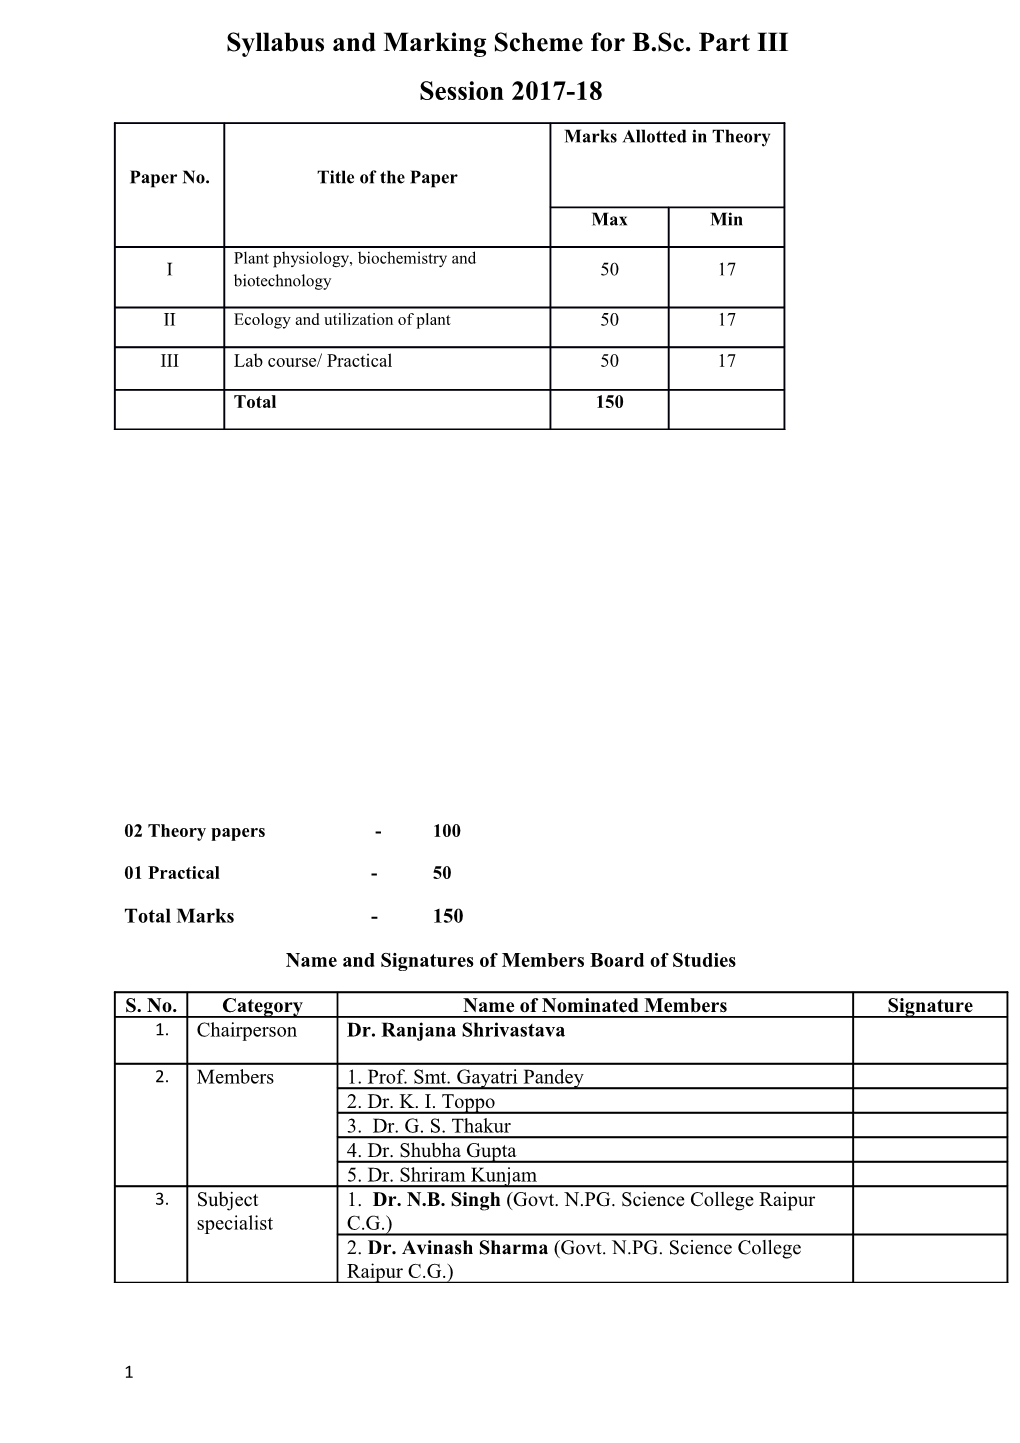 Syllabus and Marking Scheme for B.Sc. Part III